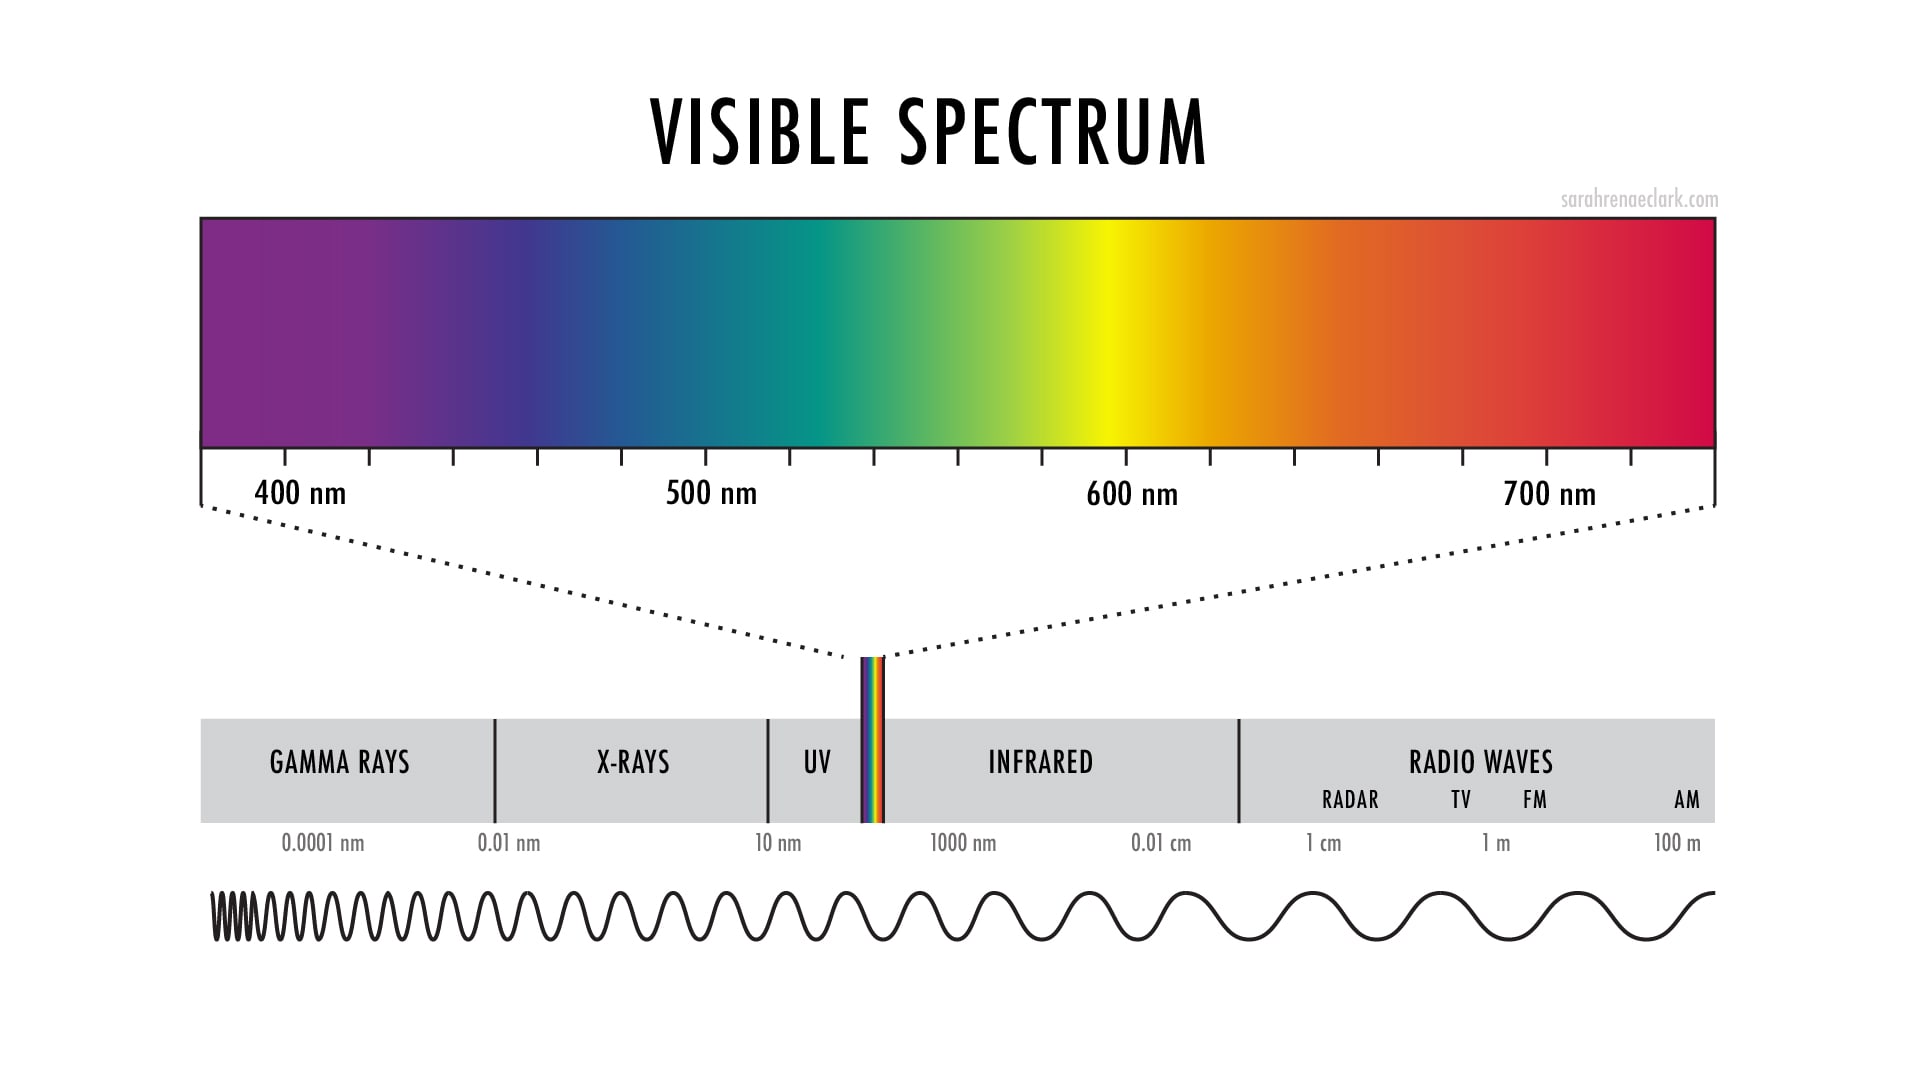 The Visible Spectrum showing violet, blue, cyan, green, yellow, orange, red